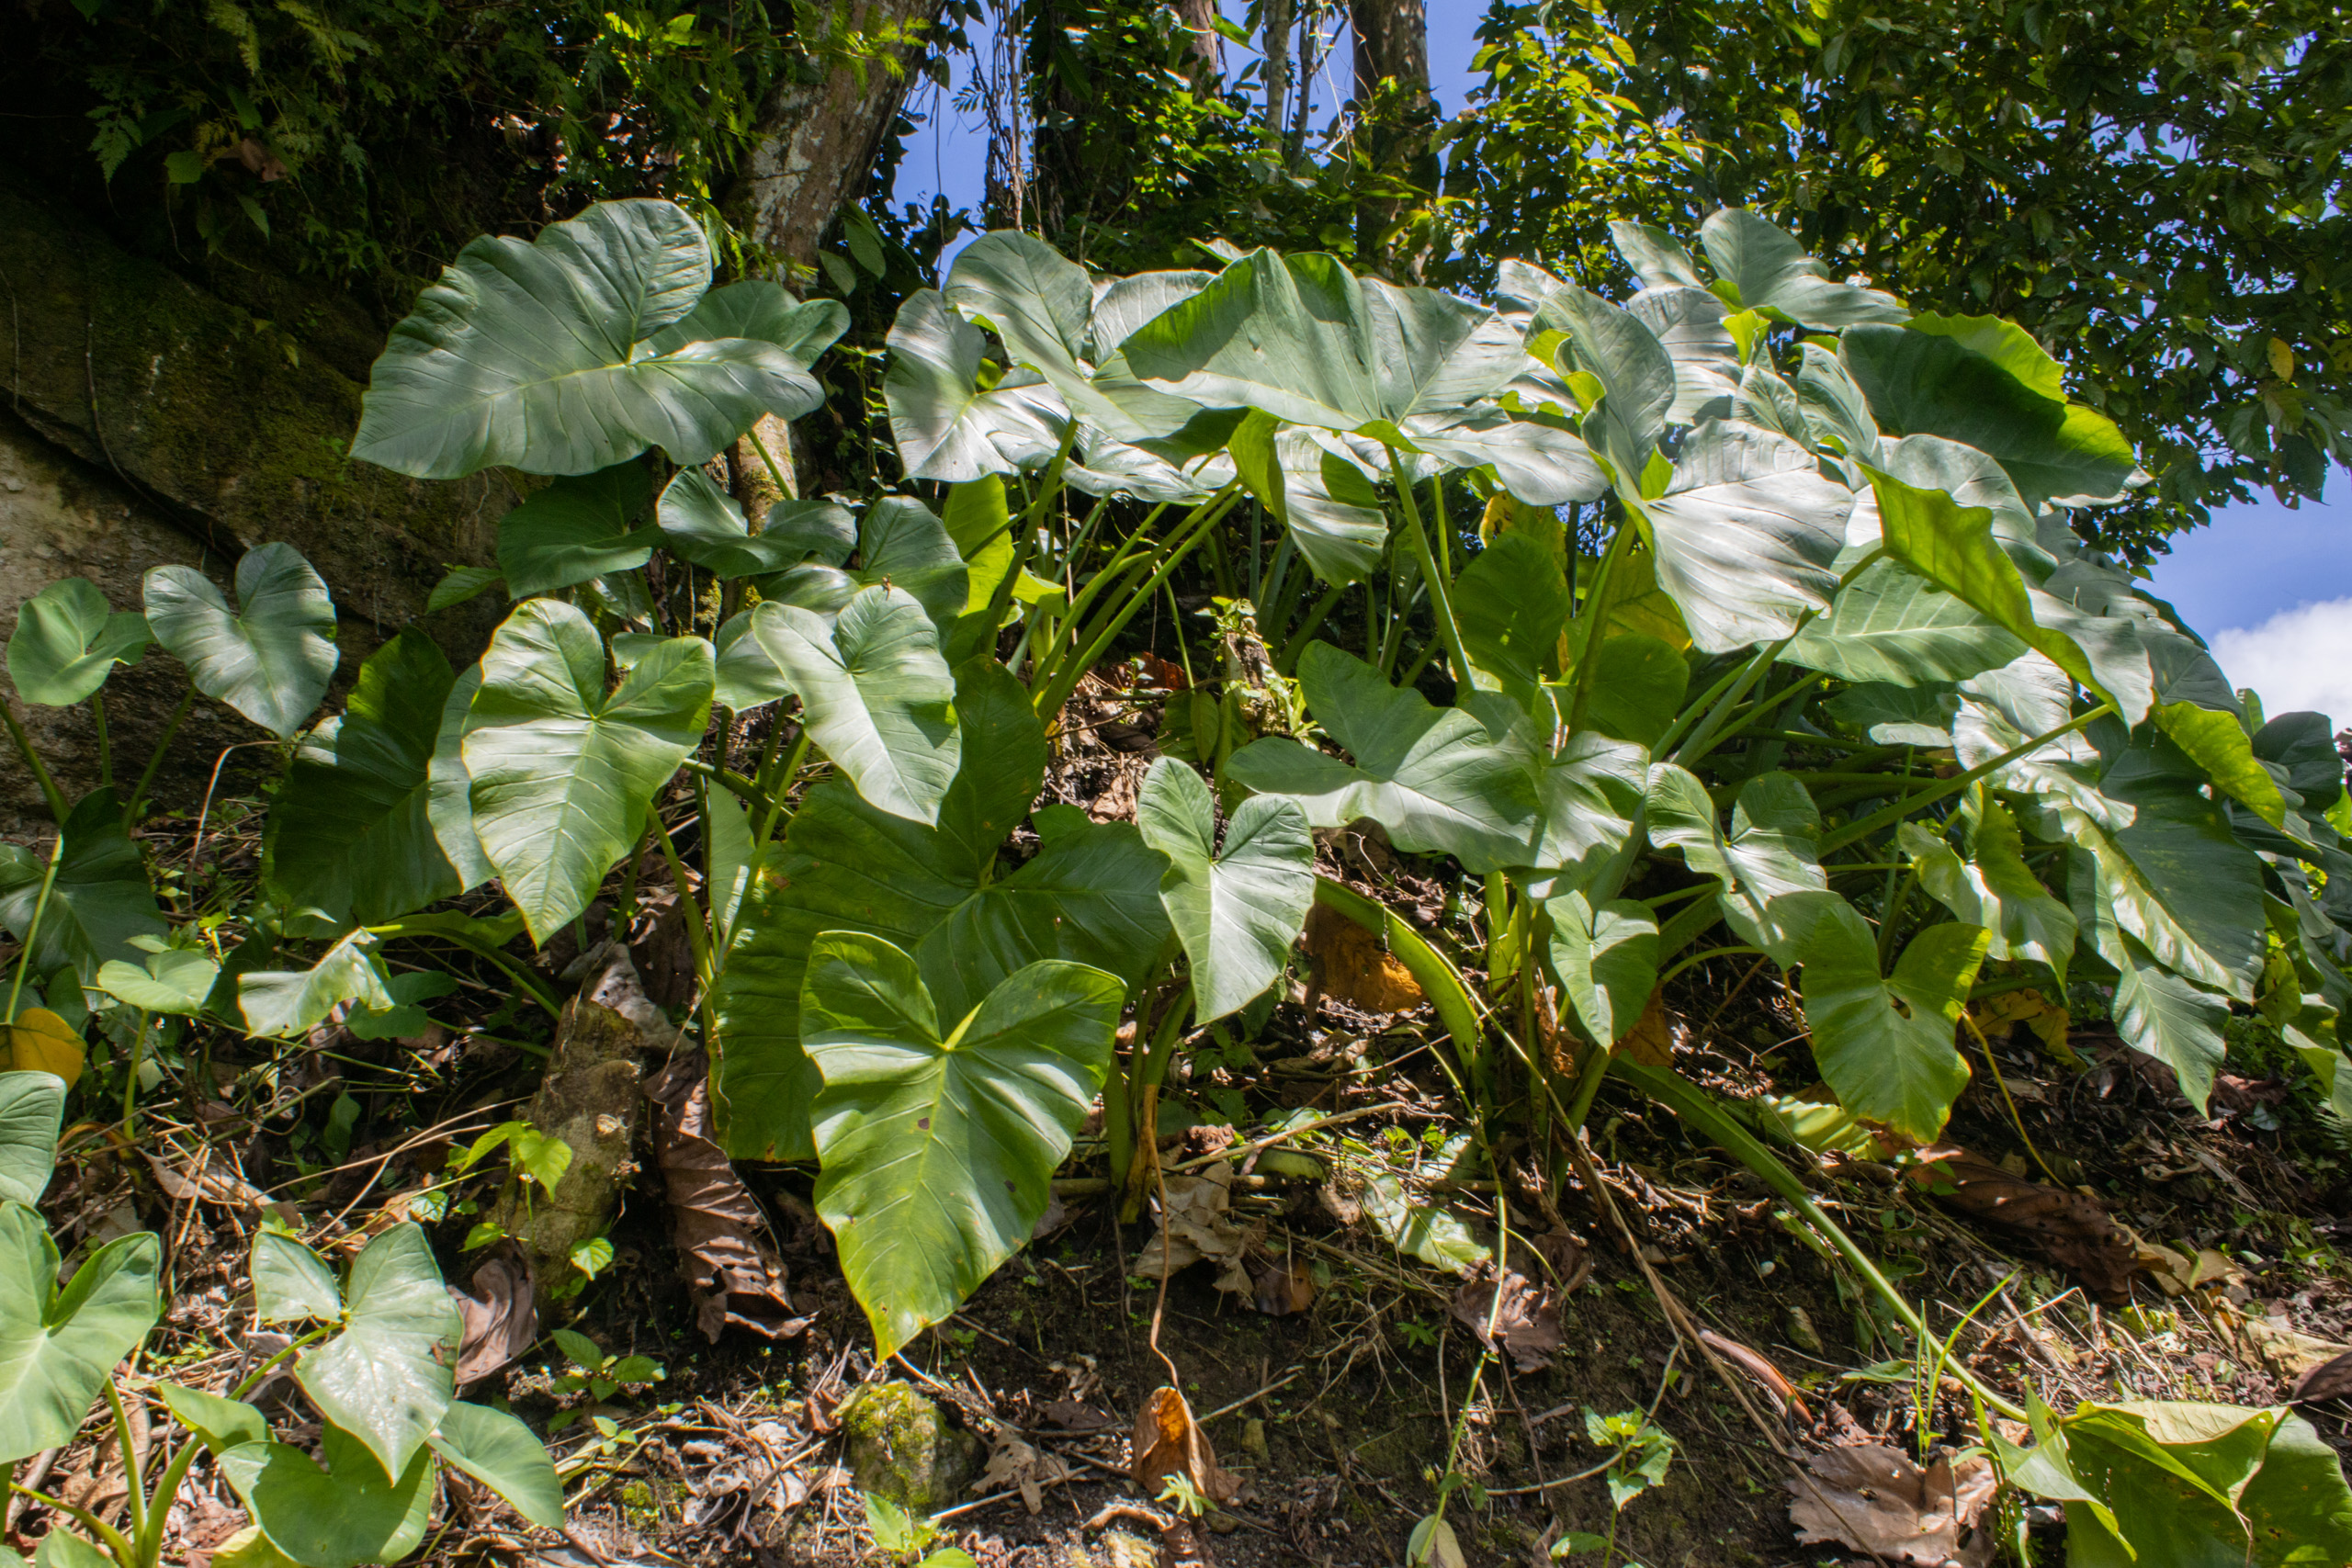 A root vegetable, taro is an important source of food in West Papua